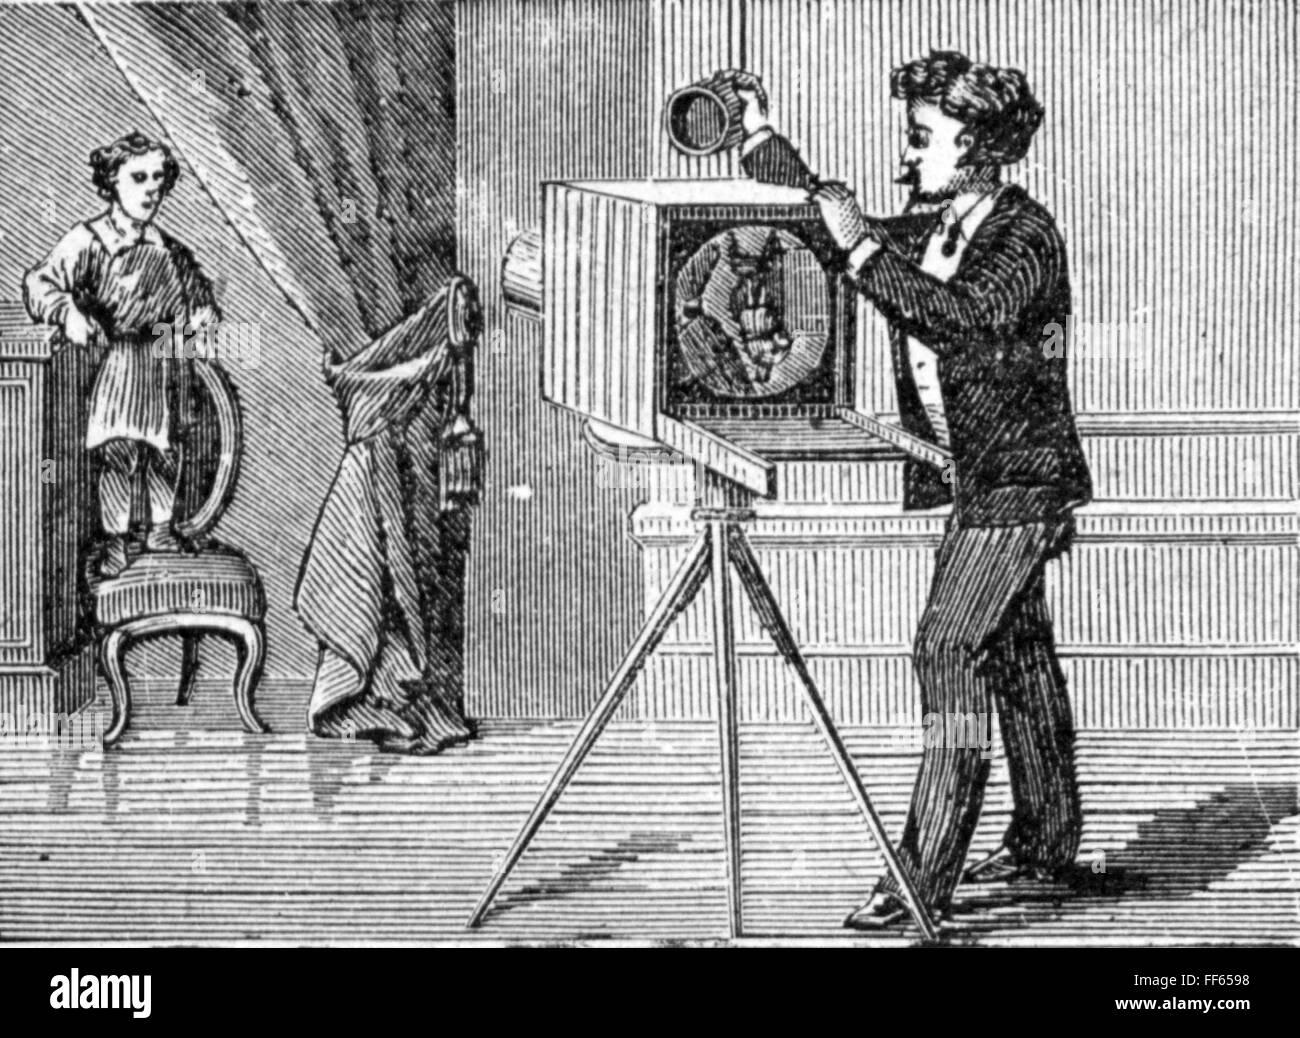 photography, photographer, photographer taking picture photo of a child, wood engraving, 19th century, 19th century, graphic, graphics, occupation, occupations, photographer's studio, photographer's salon, studio, atelier, artist's workroom, ateliers, artist's workrooms, studios, taking a photo, taken a photo, take a picture, take a photograph, sitter, pose, full length, standing, tripod, tripods, chair, chairs, photo camera, camera, cameras, photographer, photographers, historic, historical, man, men, male, child, people, Additional-Rights-Clearences-Not Available Stock Photo